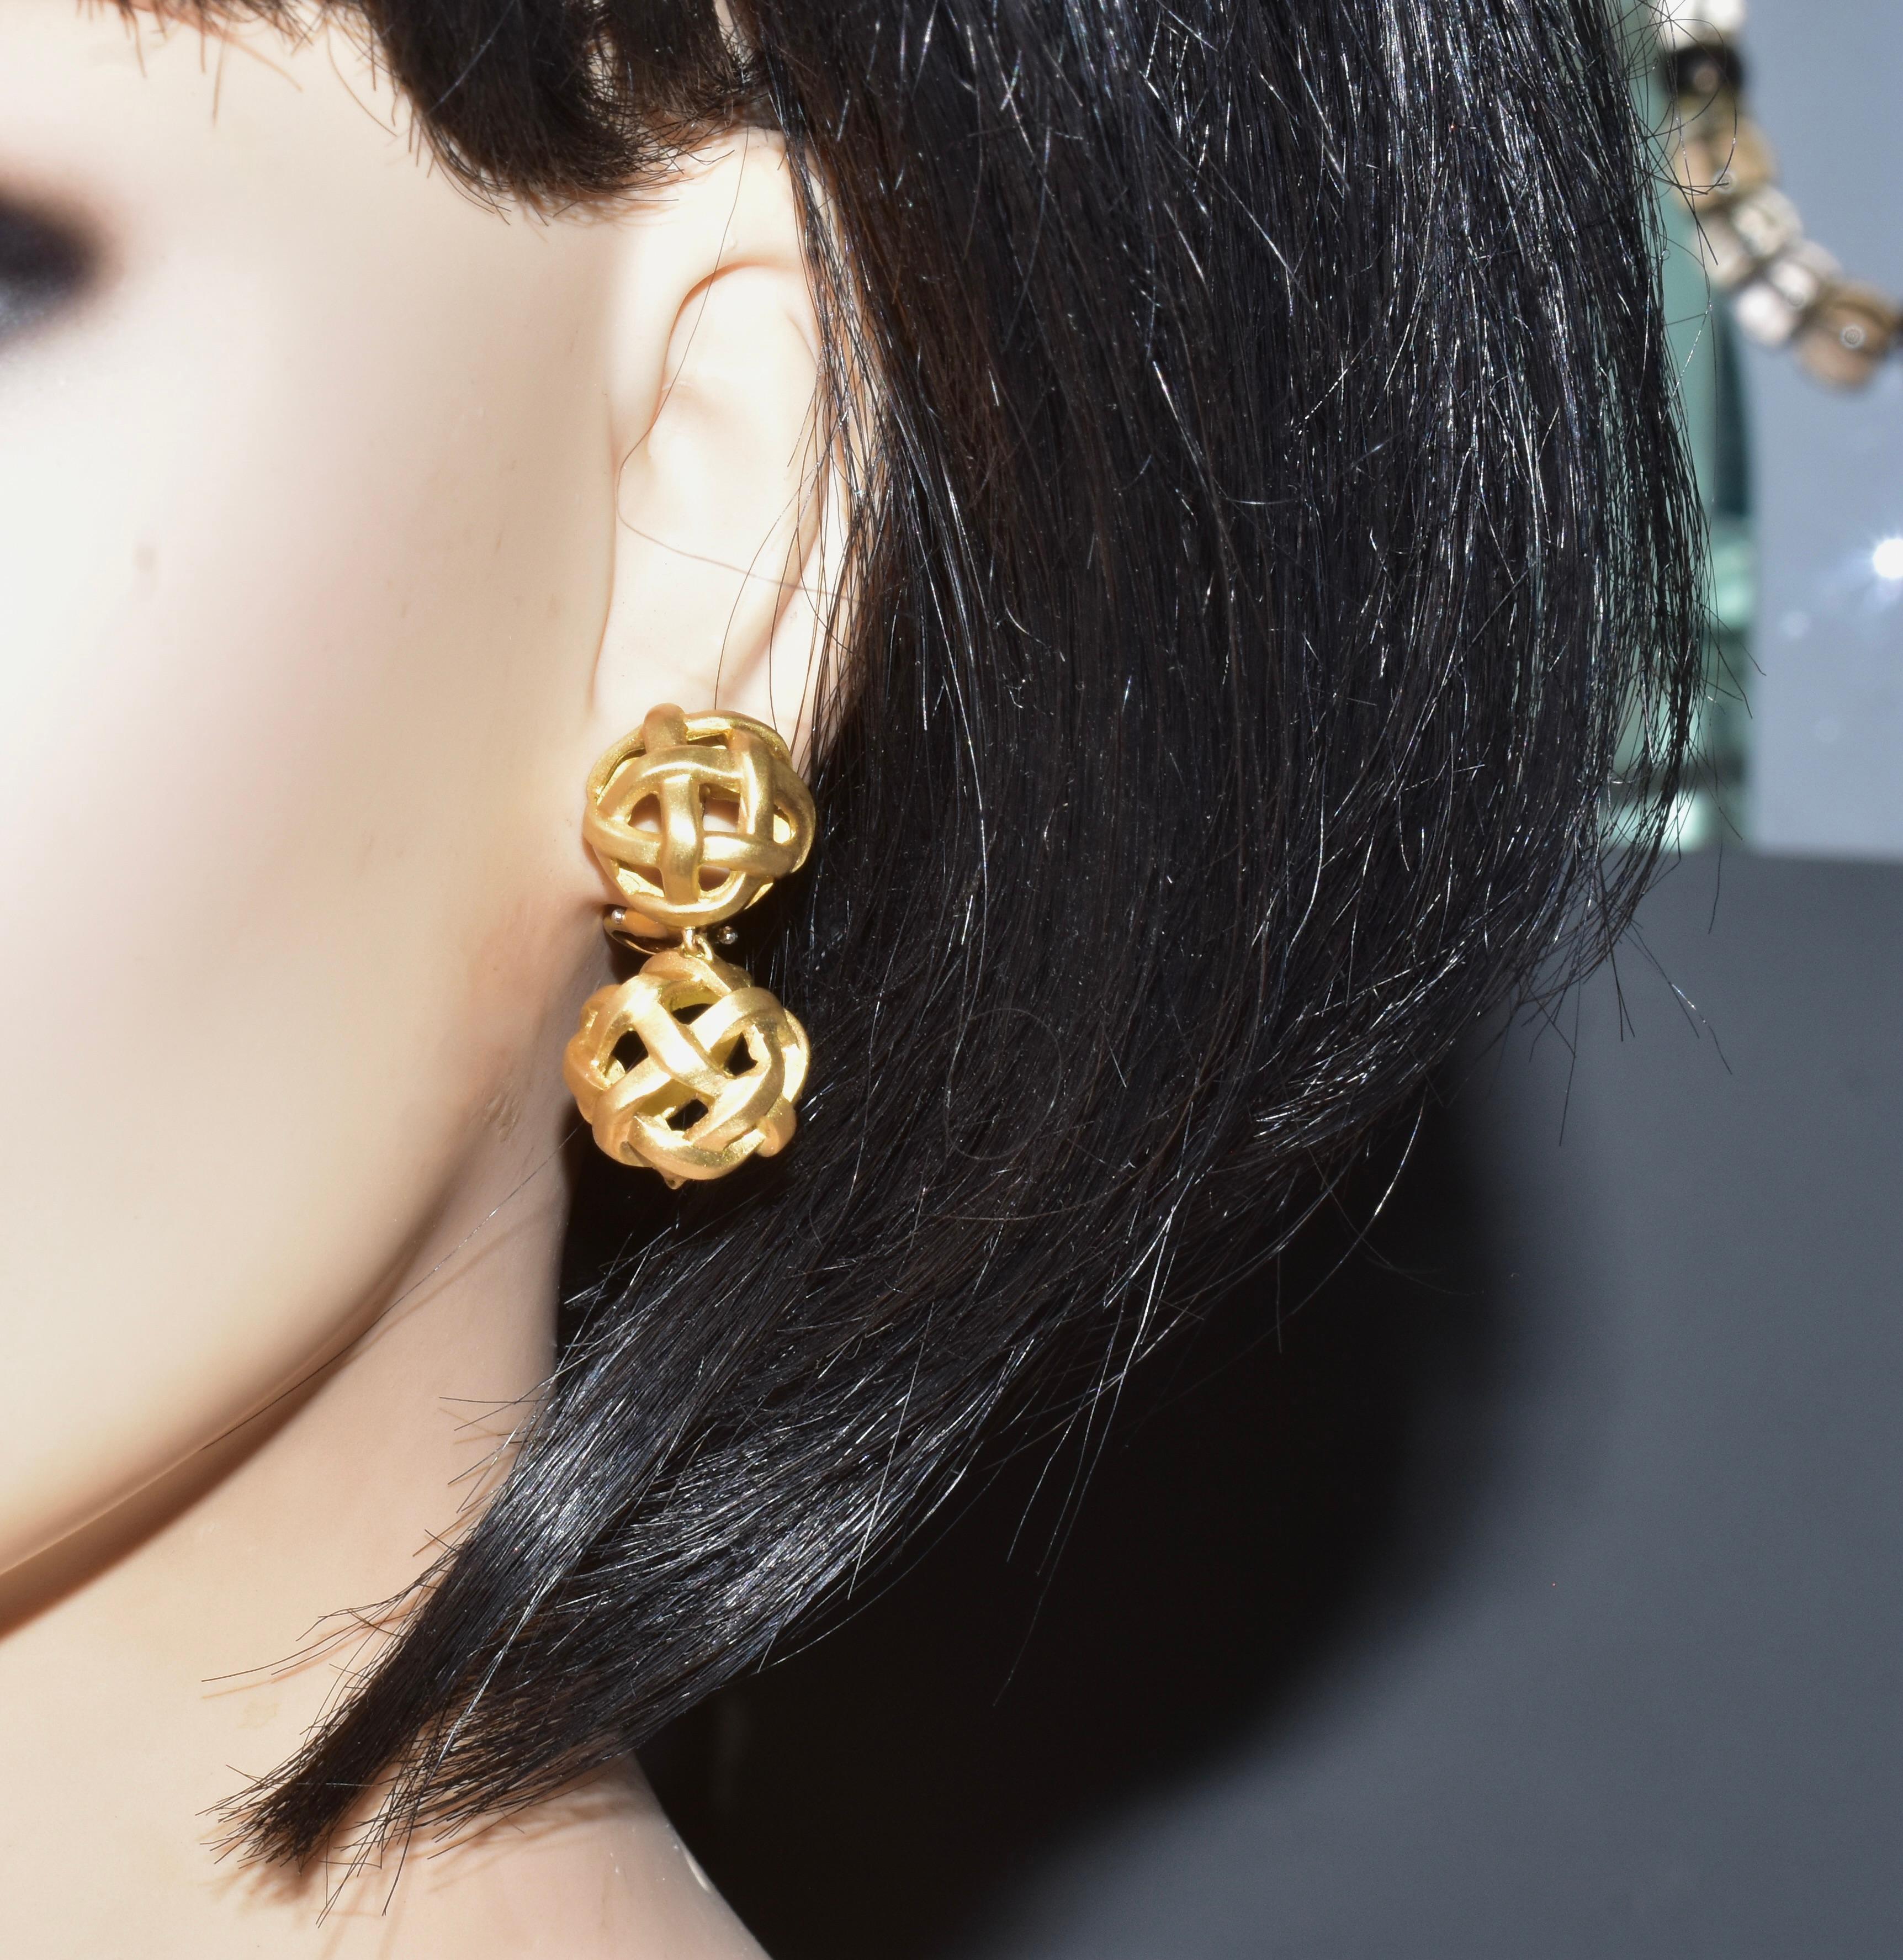 Contemporary Angela Cummings Earrings in 18K with a Sphere Shape, the bottoms detachable 1985